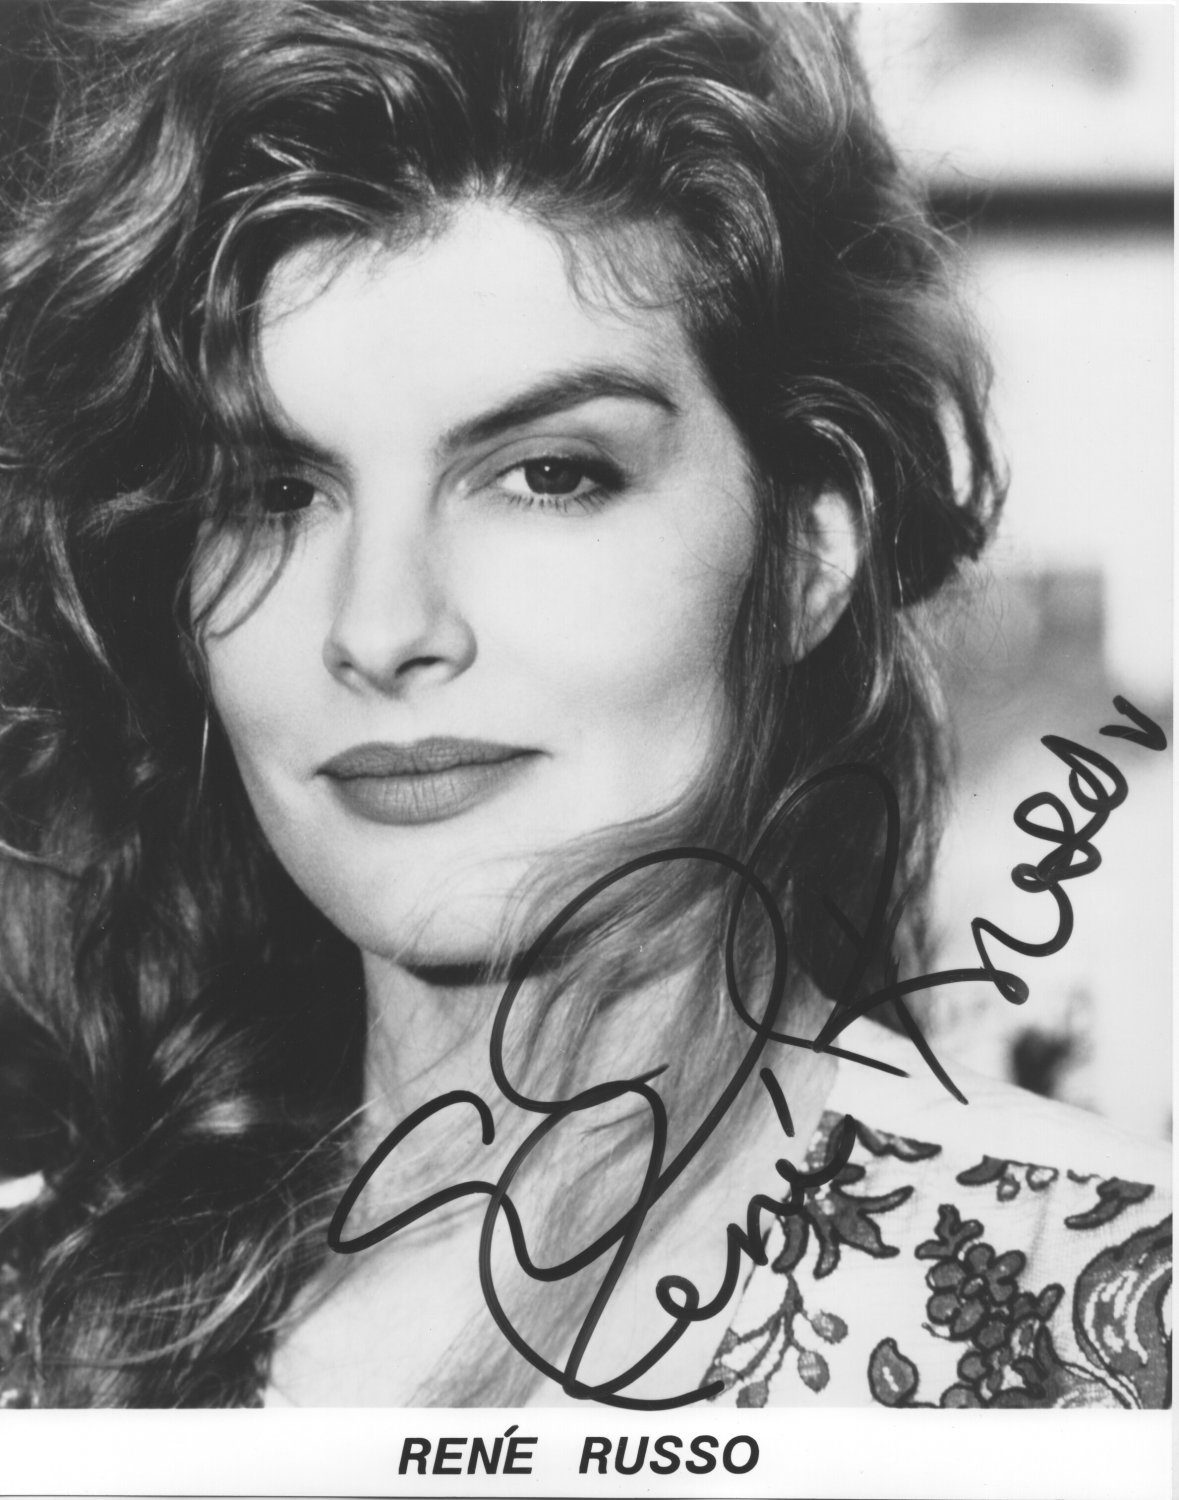 RENE RUSSO - STUNNING ACTRESS - HAND SIGNED AUTOGRAPHED PHOTO WITH COA